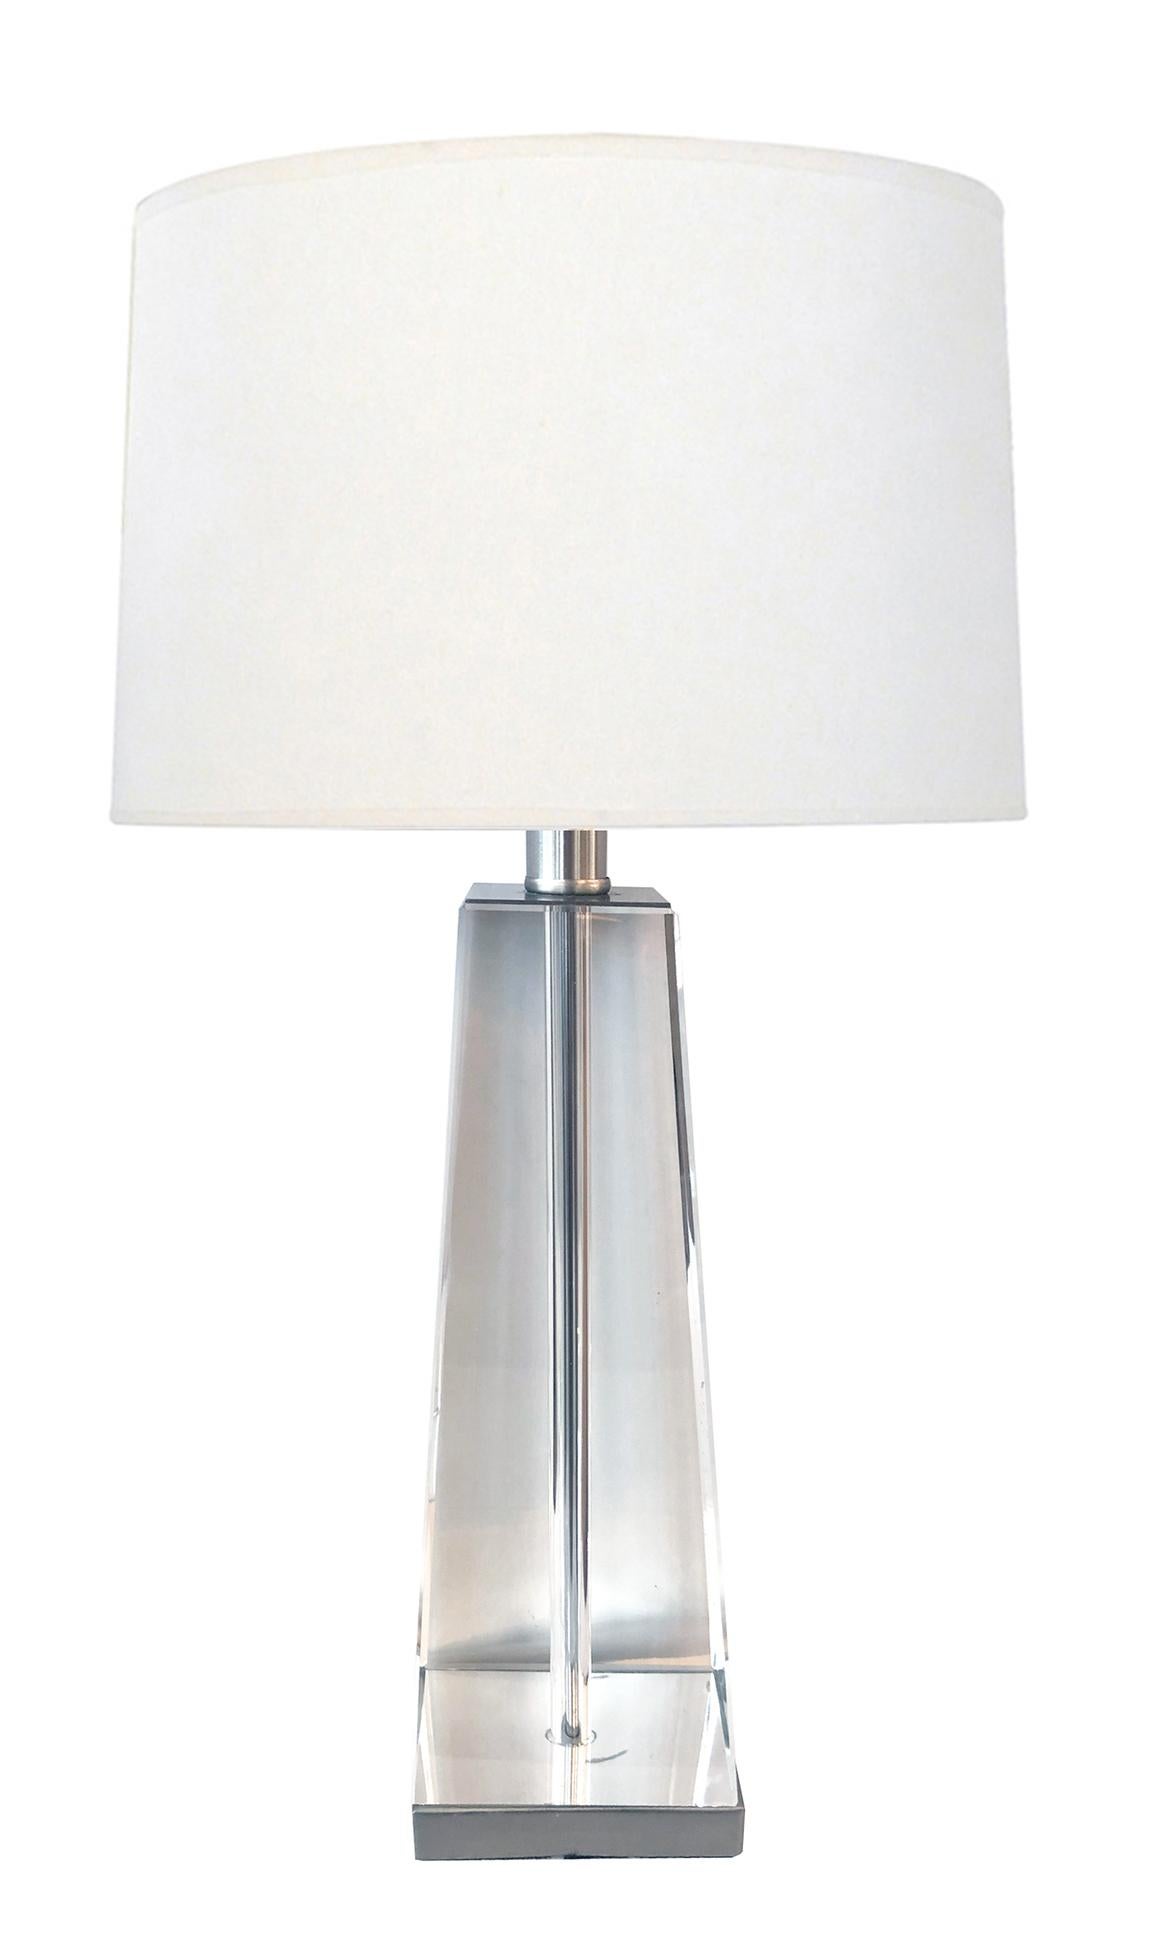 a versatile lamp that can be used in multiple settings, of thick hand-polished crystal with its ethereal reflective quality allowing light to penetrate changing from day to evening; all resting on a brushed chrome base; the obelisk was originally